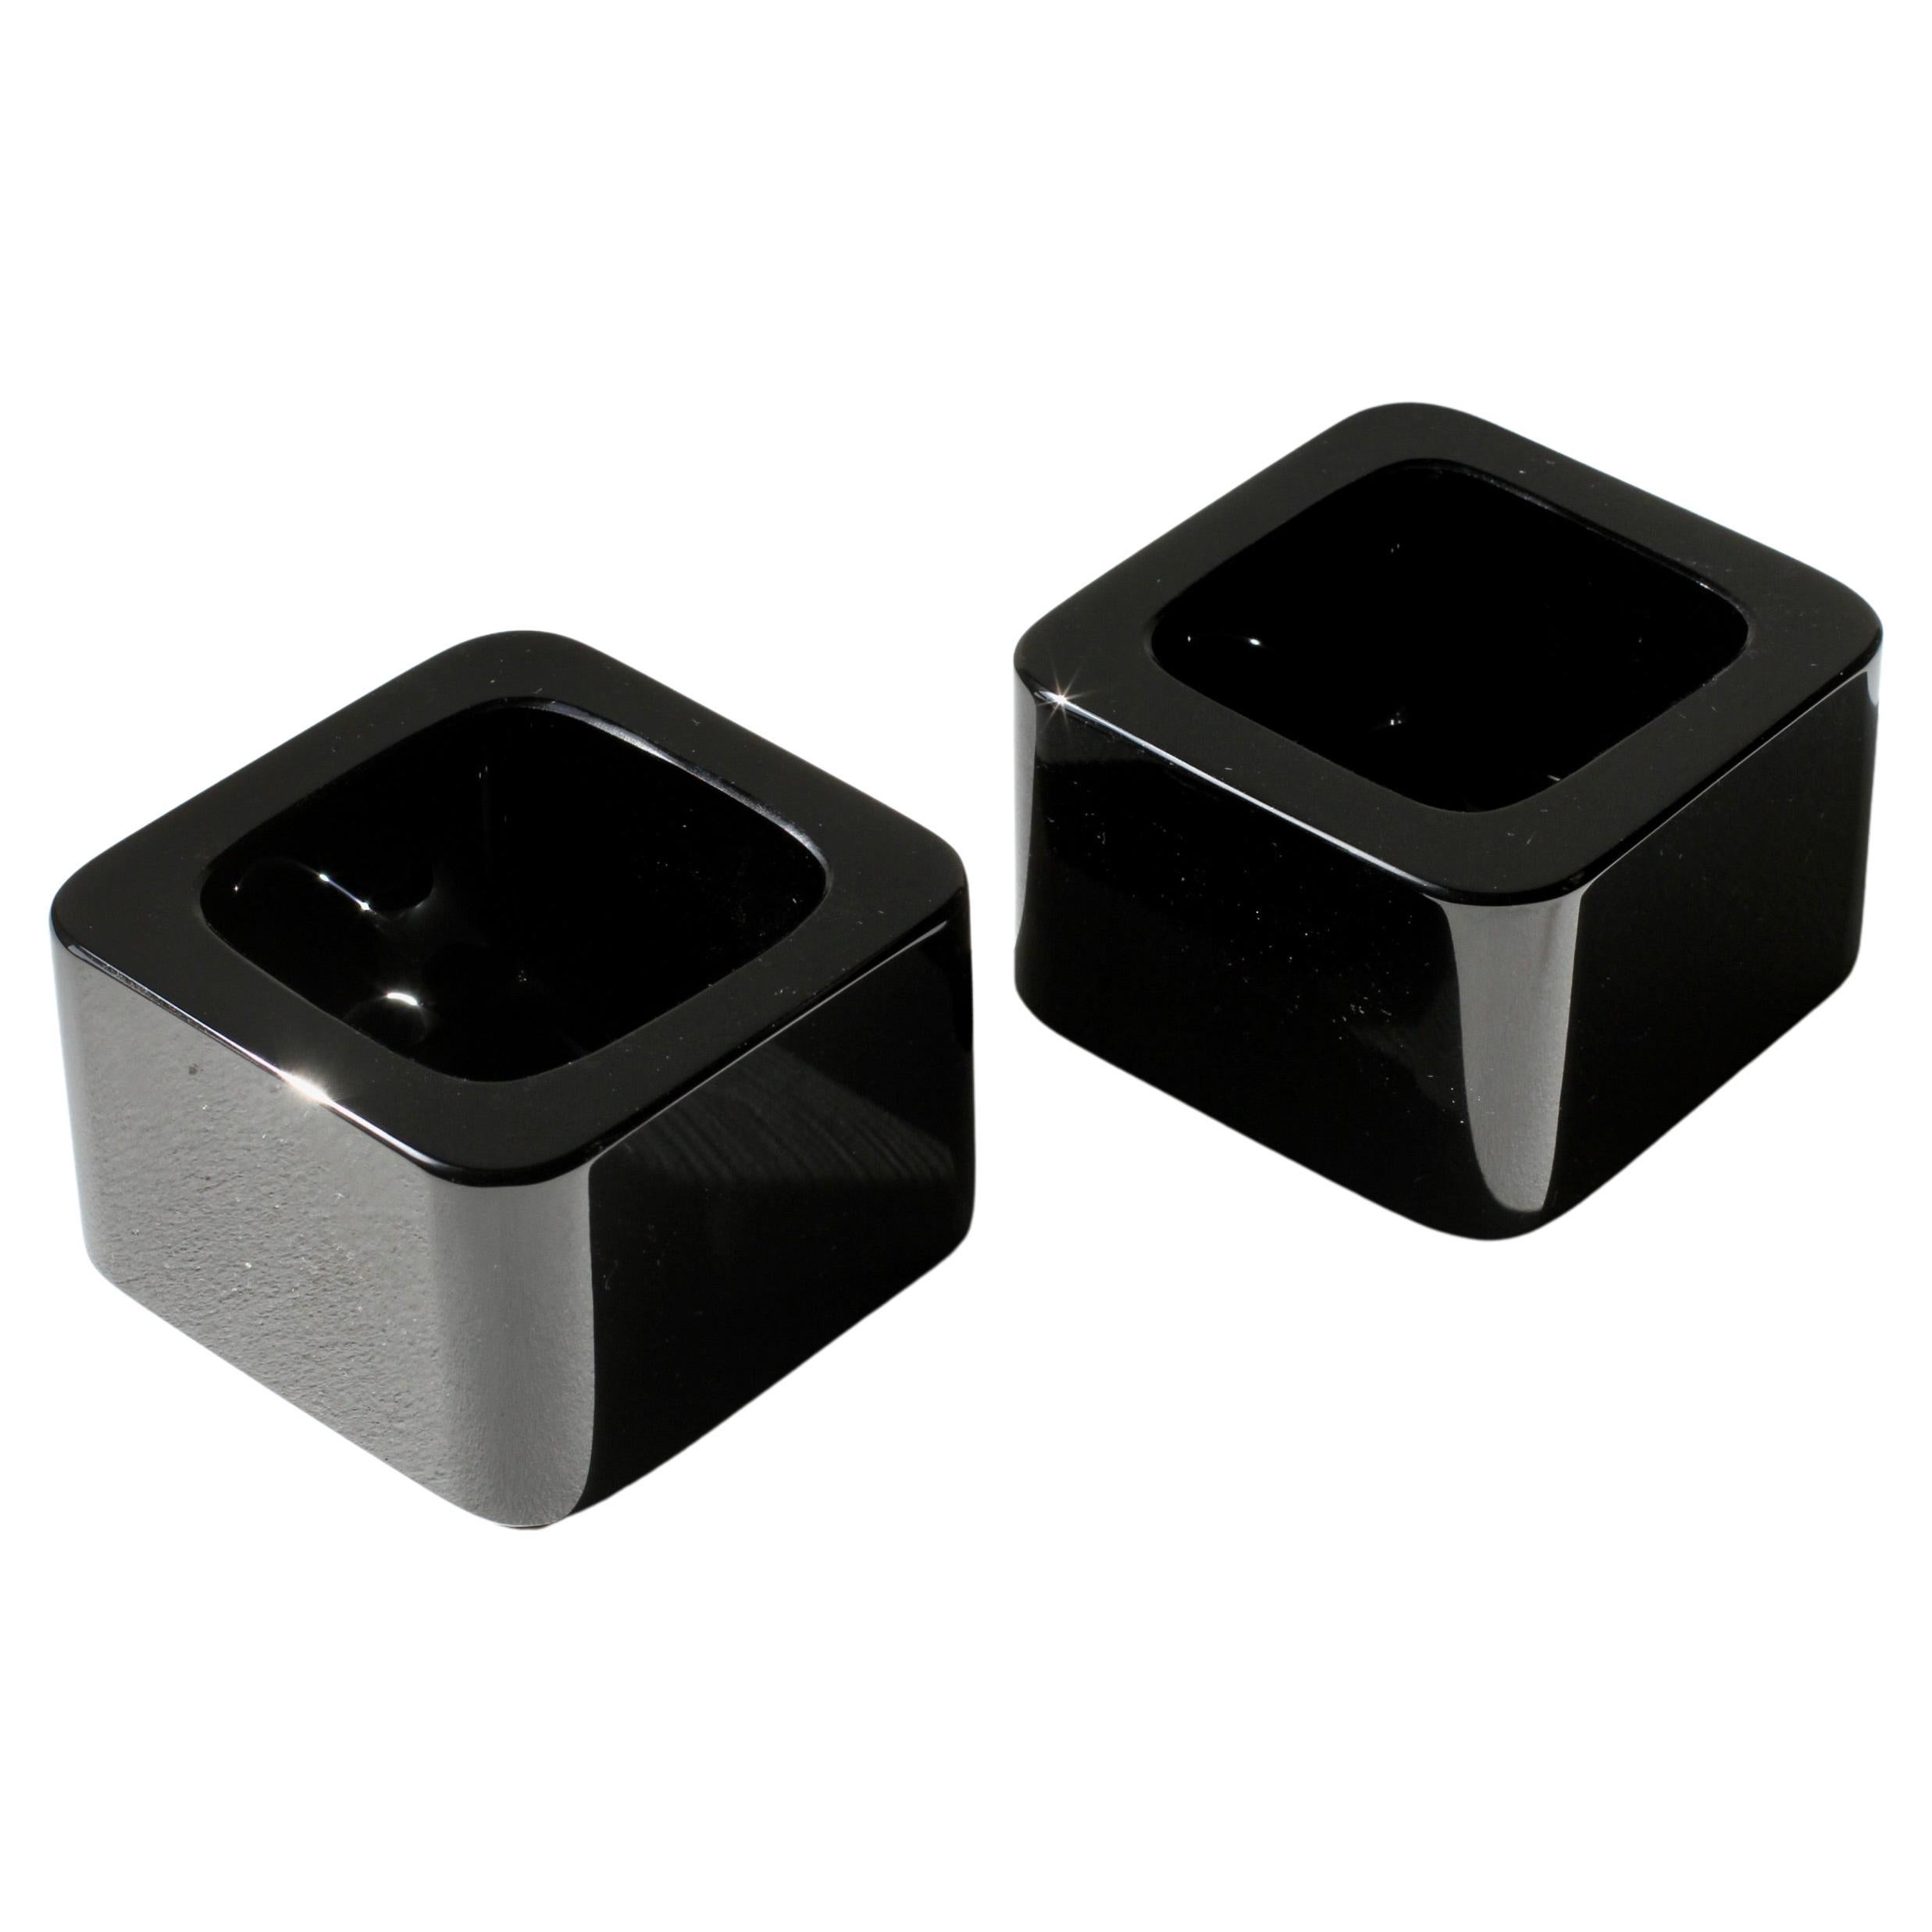 Seguso Vintage Pair of Square Black Murano Glass Bowls Dishes or Ashtrays 1980s For Sale